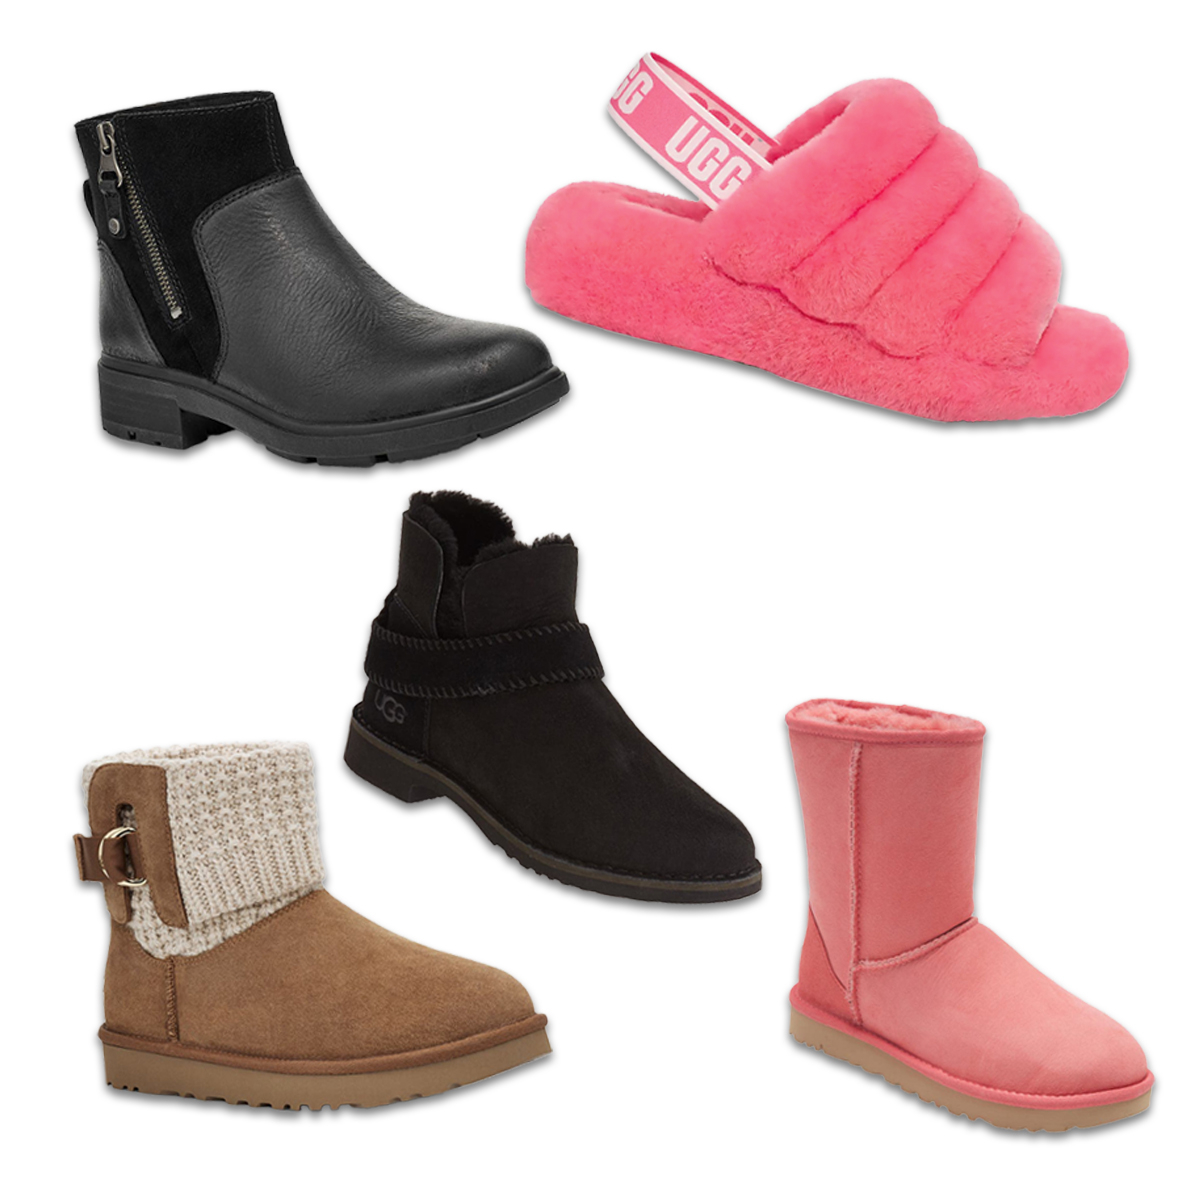 The Best  Deals on UGG Boots: Save up to 50% on UGG Boots